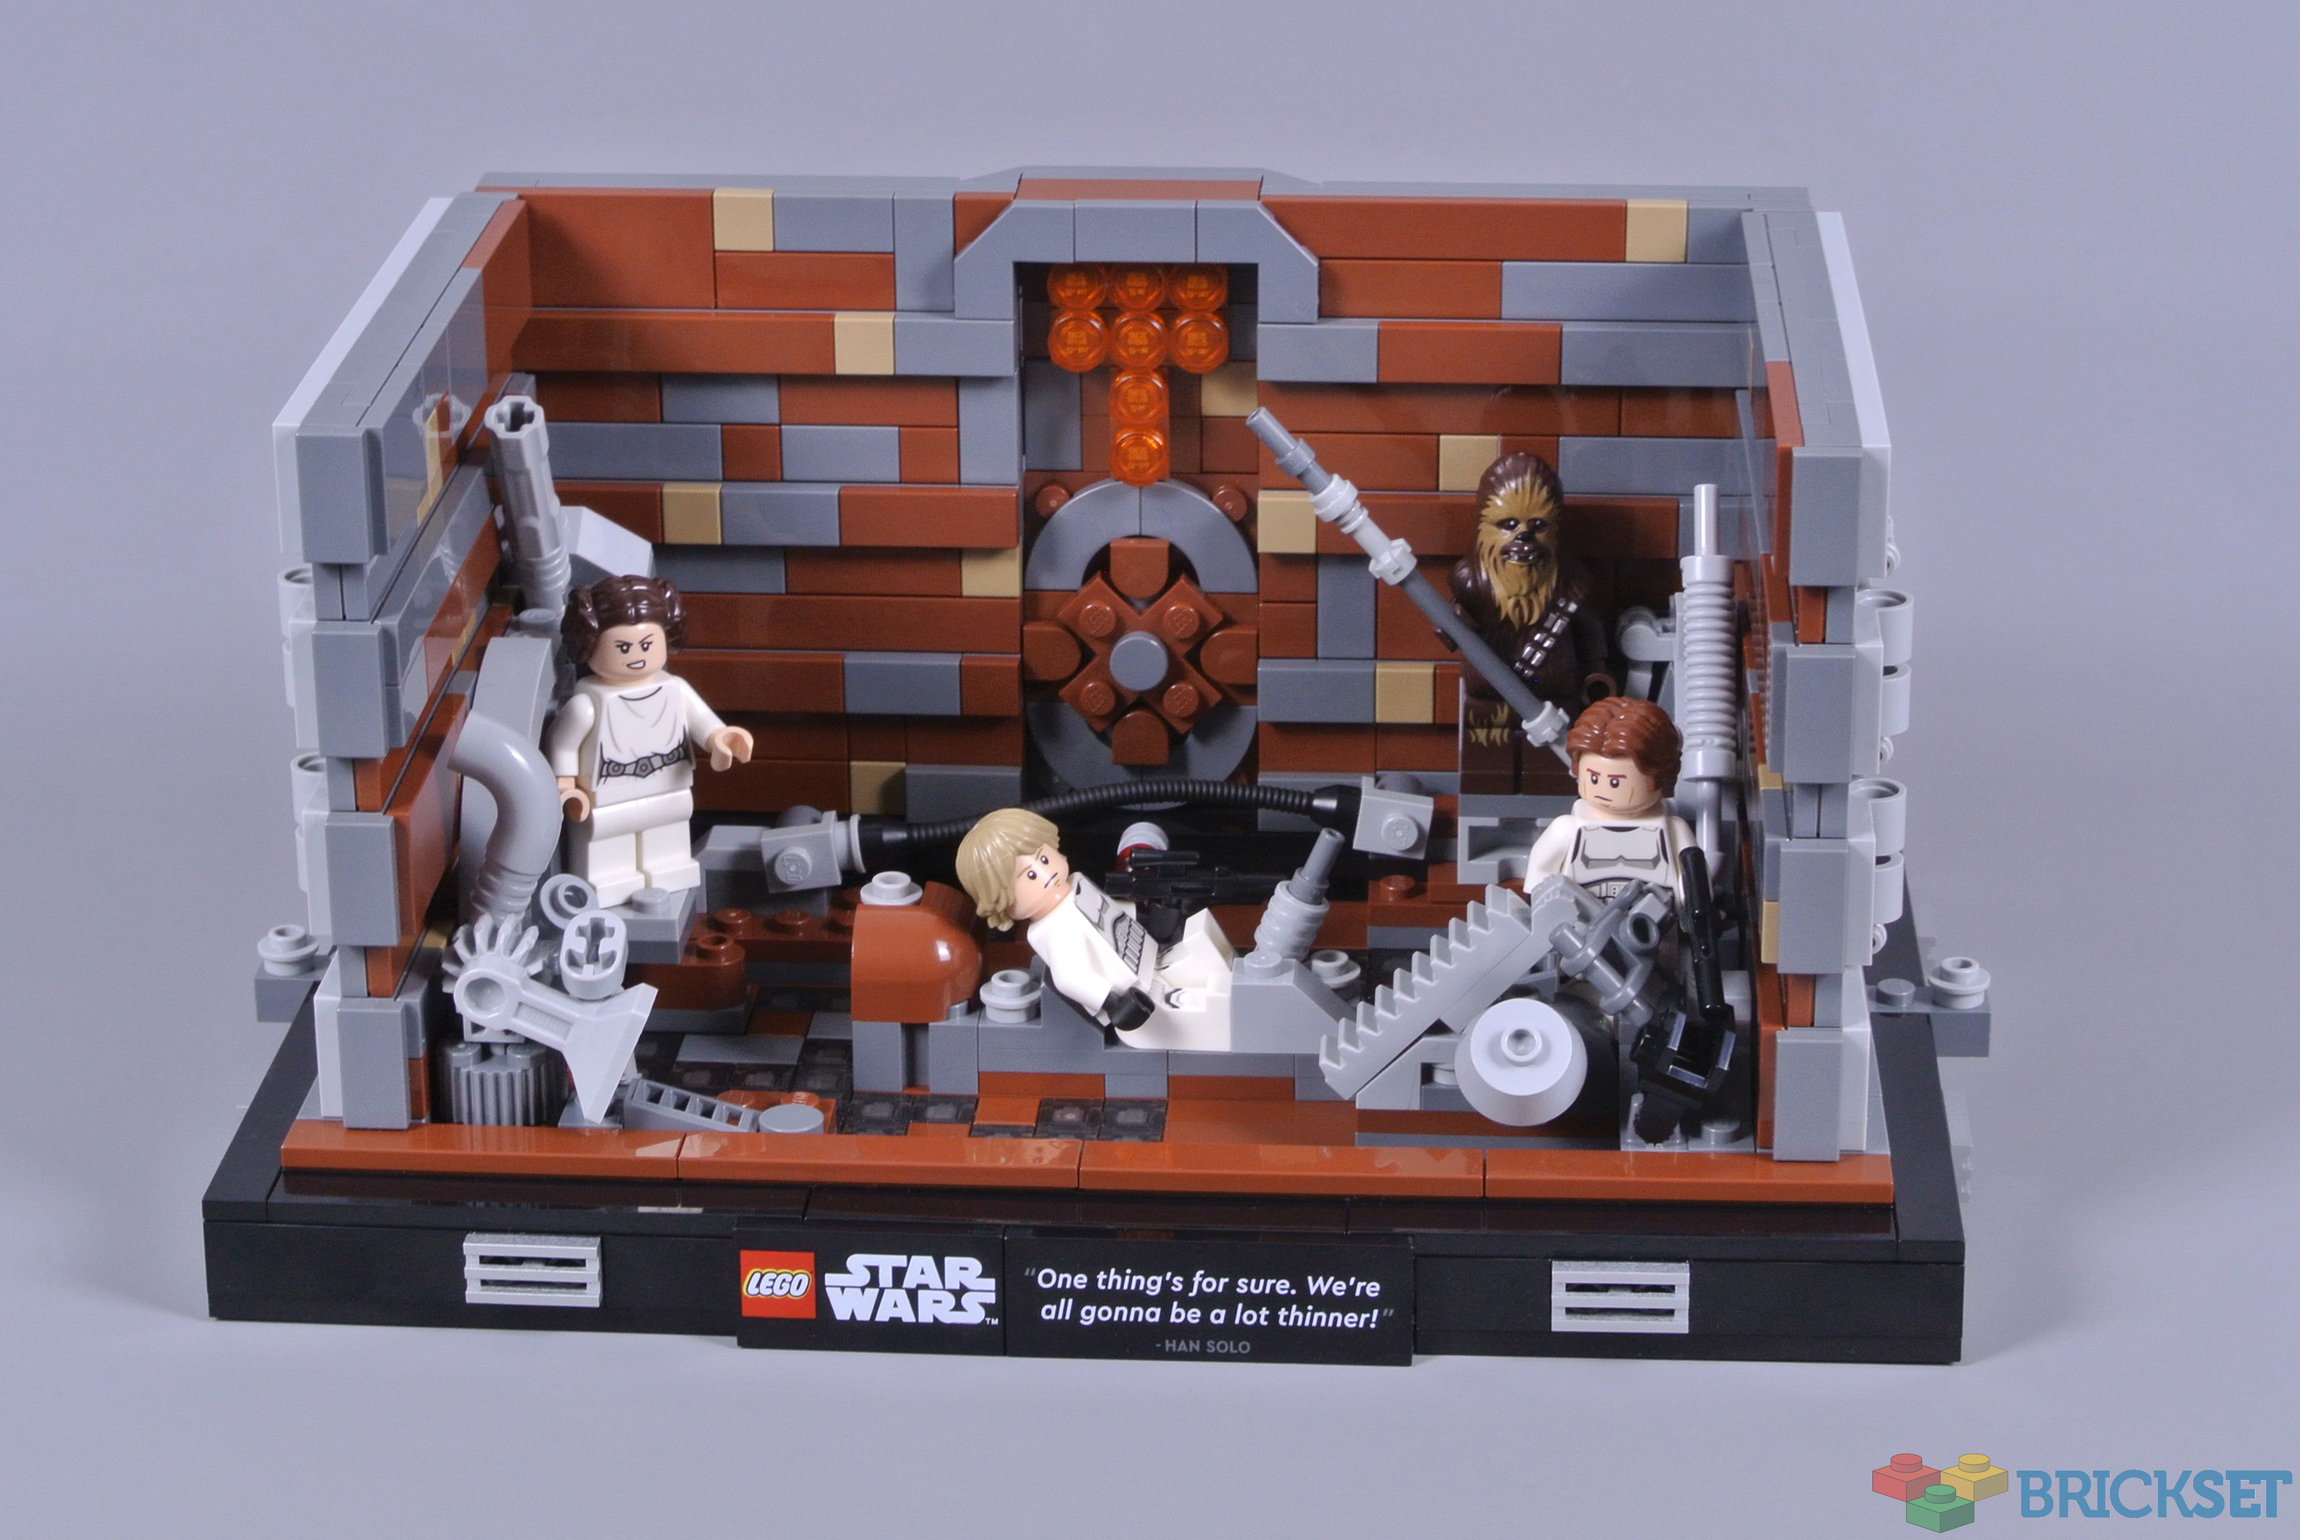 Two New LEGO Star Wars Diorama Collection Sets Revealed - The Brick Fan